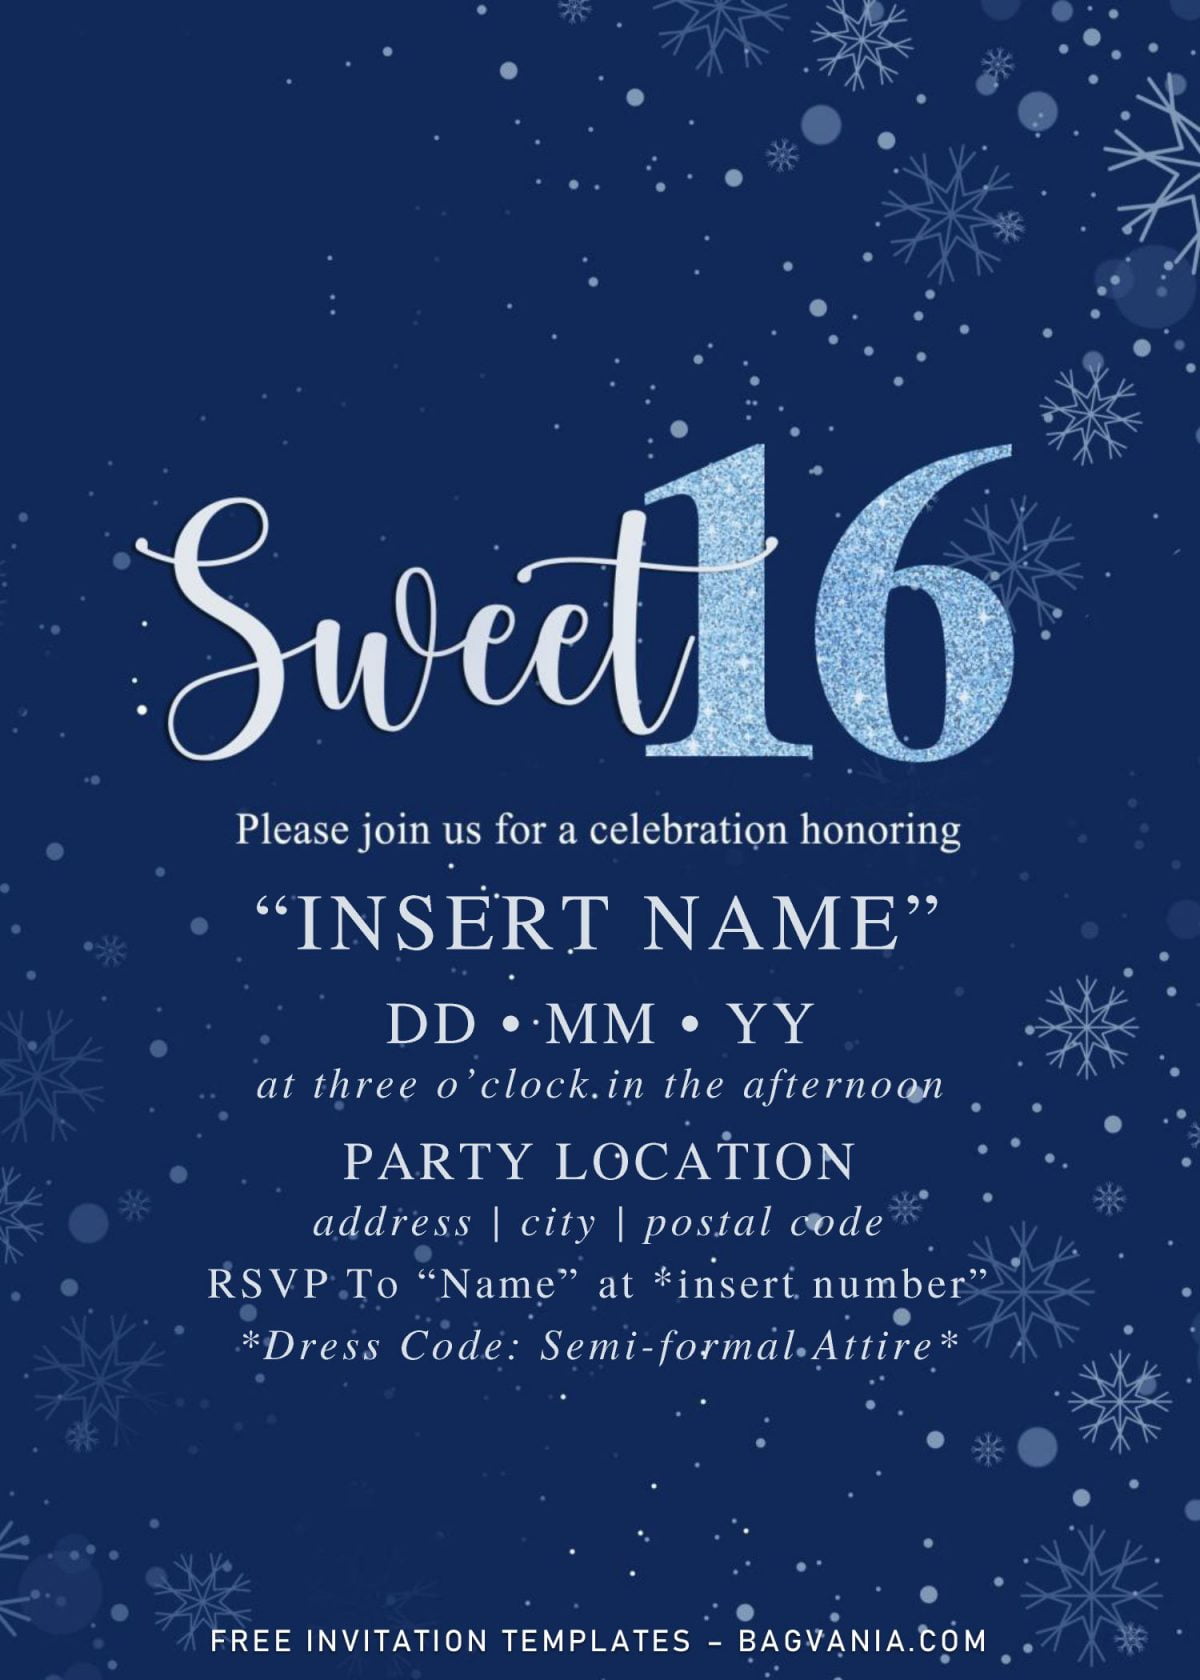 Free Winter Sweet Sixteen Birthday Invitation Templates For Word and has sparkling snowflakes background